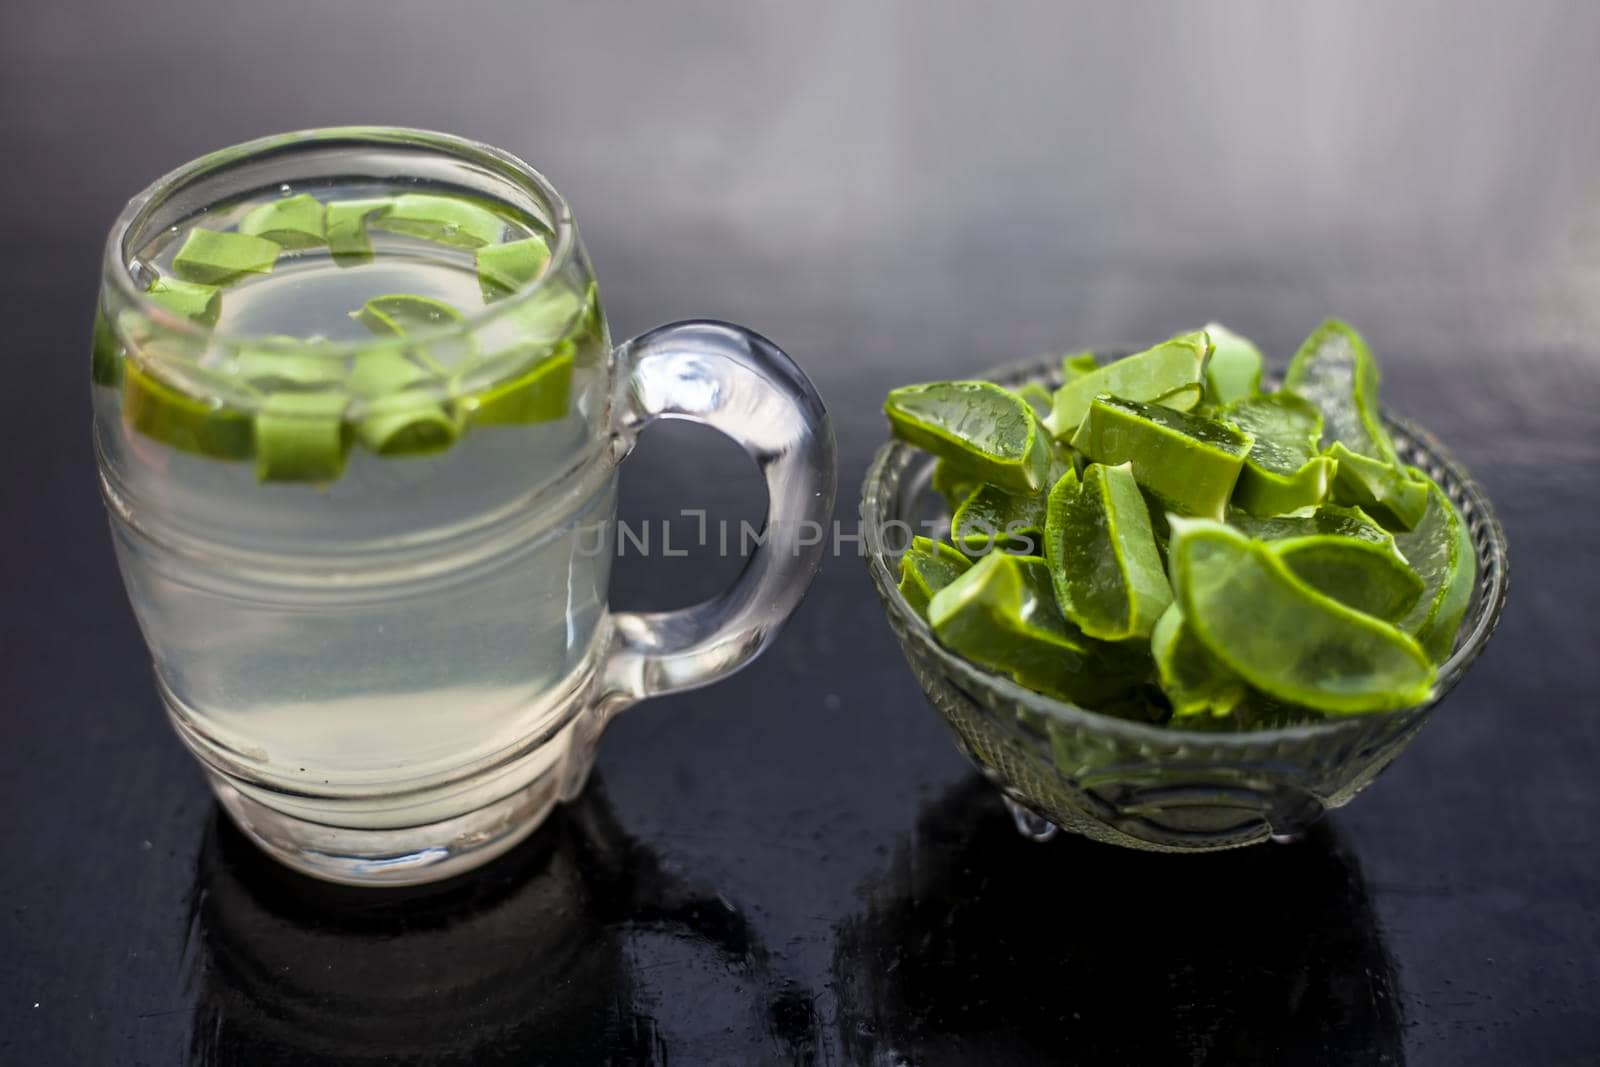 Close up of glass mug on wooden surface containing aloe vera detox drink in along with its entire raw ingredients with it. Horizontal shot with blurred background.